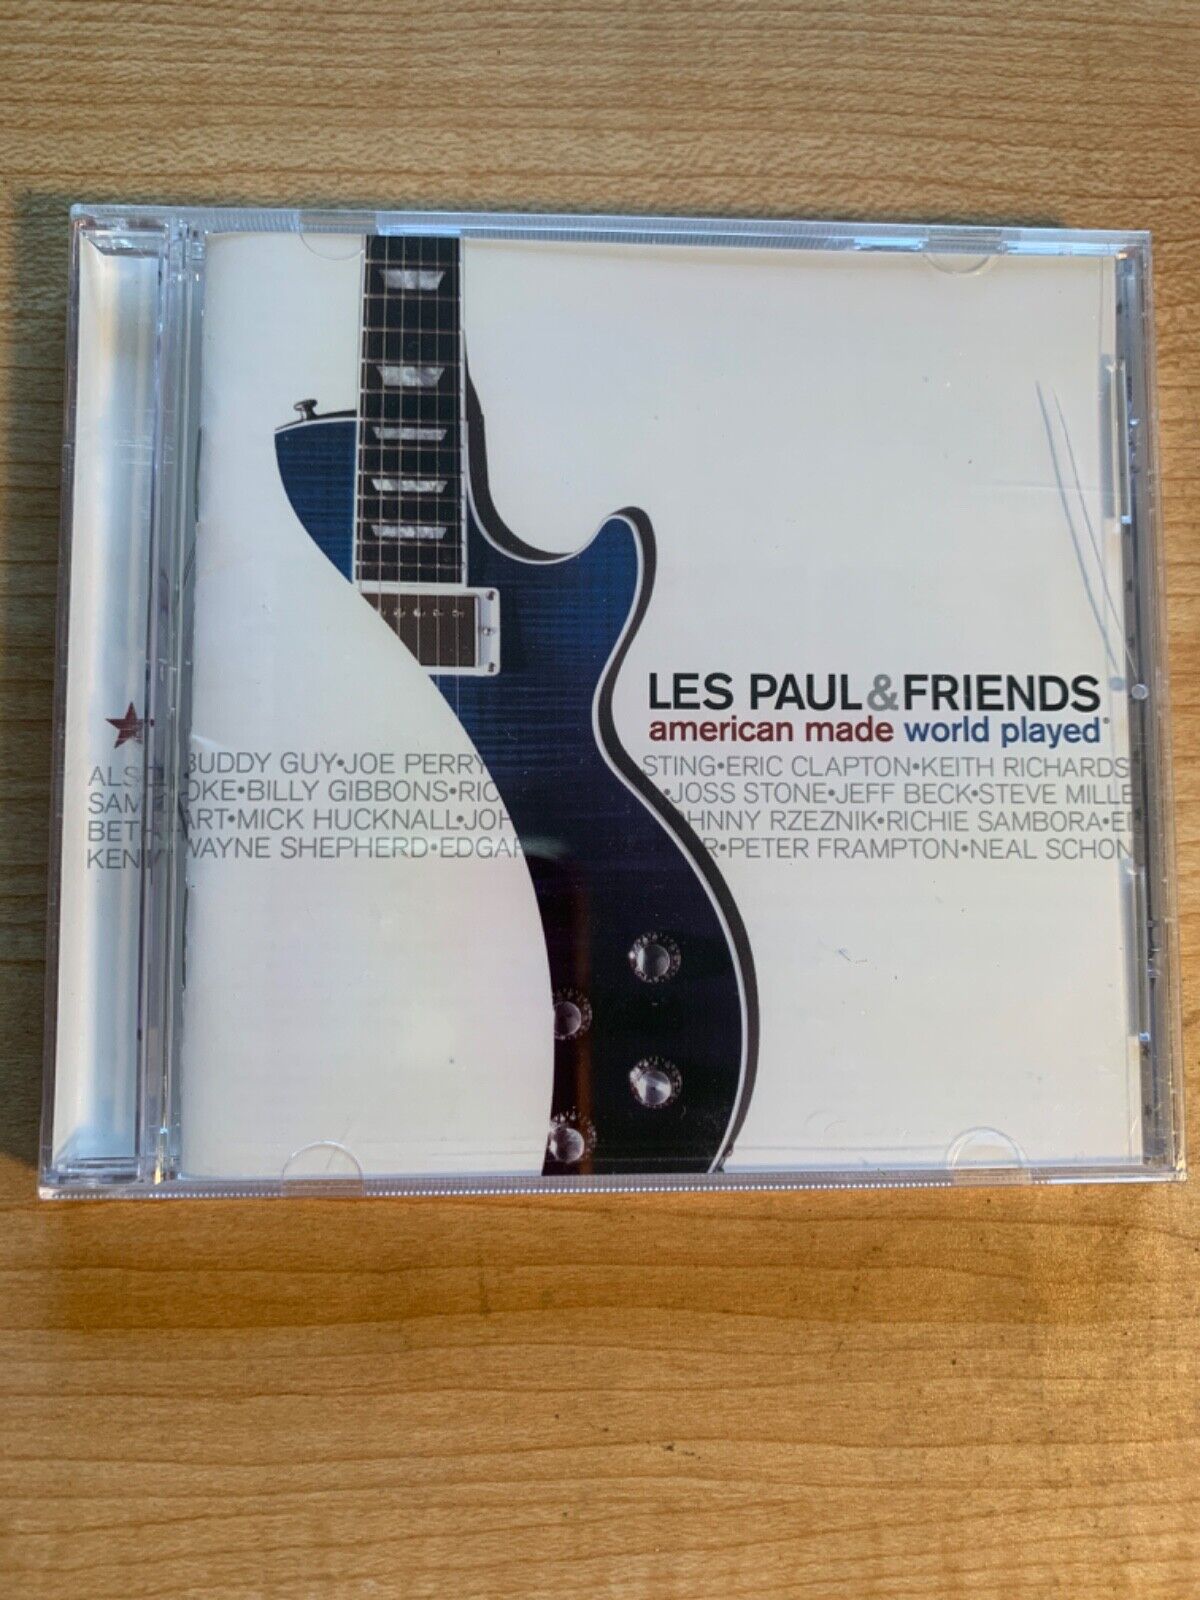 Les Paul & Friends “American Made” (CD) 16 Tracks…………..BRAND NEW & SEALED